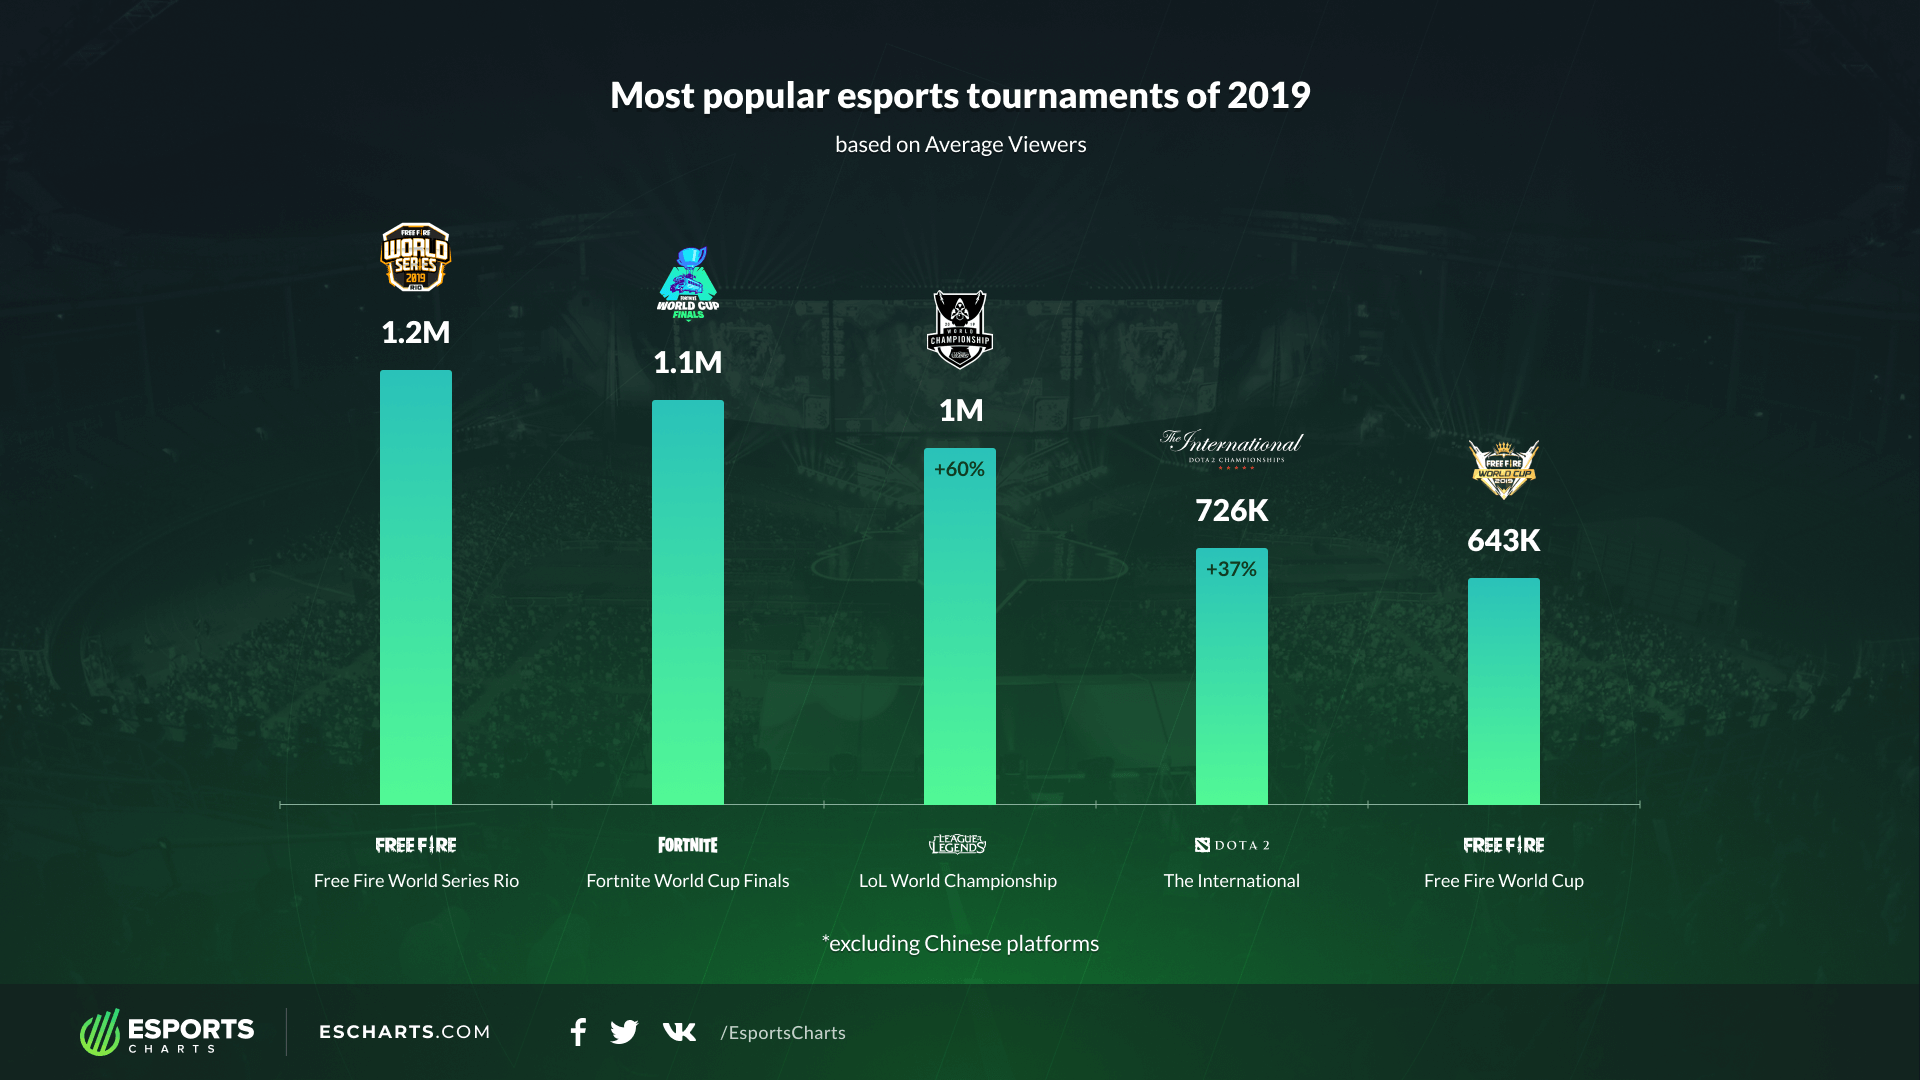 2019 Events by Average Viewership